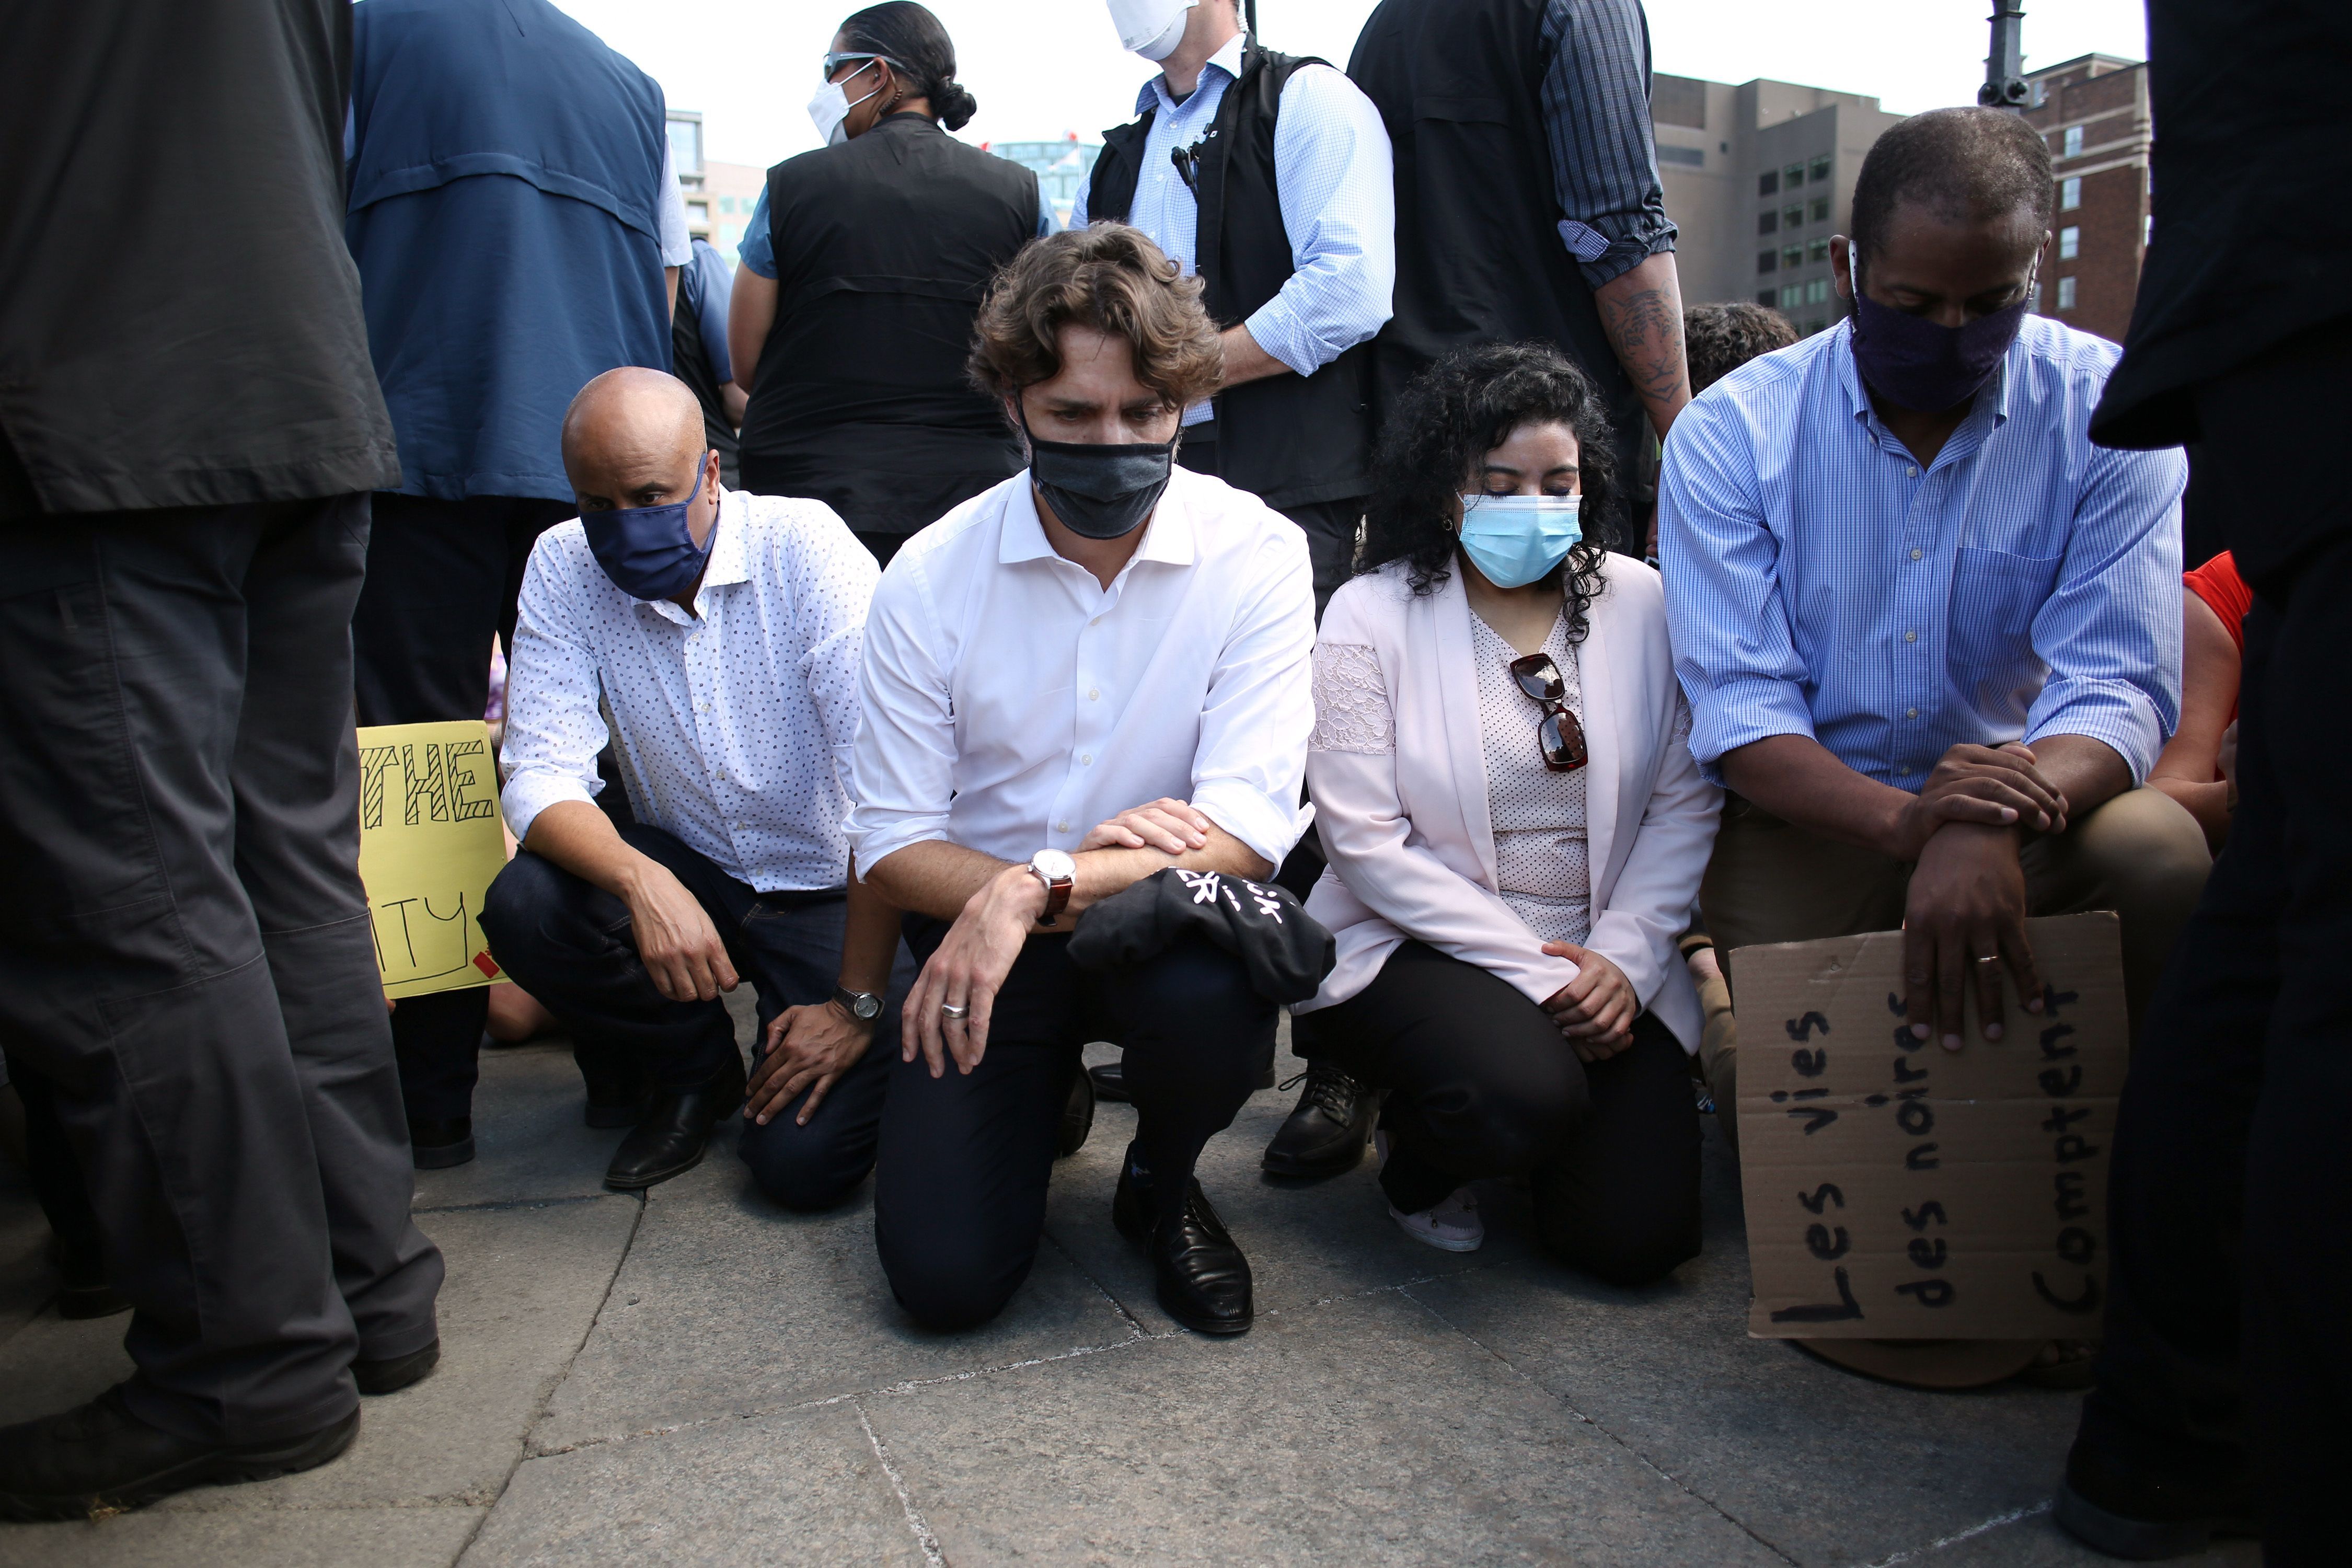  Canadian Prime Minister Justin Trudeau (2nd L) takes a knee during in a Black Lives Matter protest 